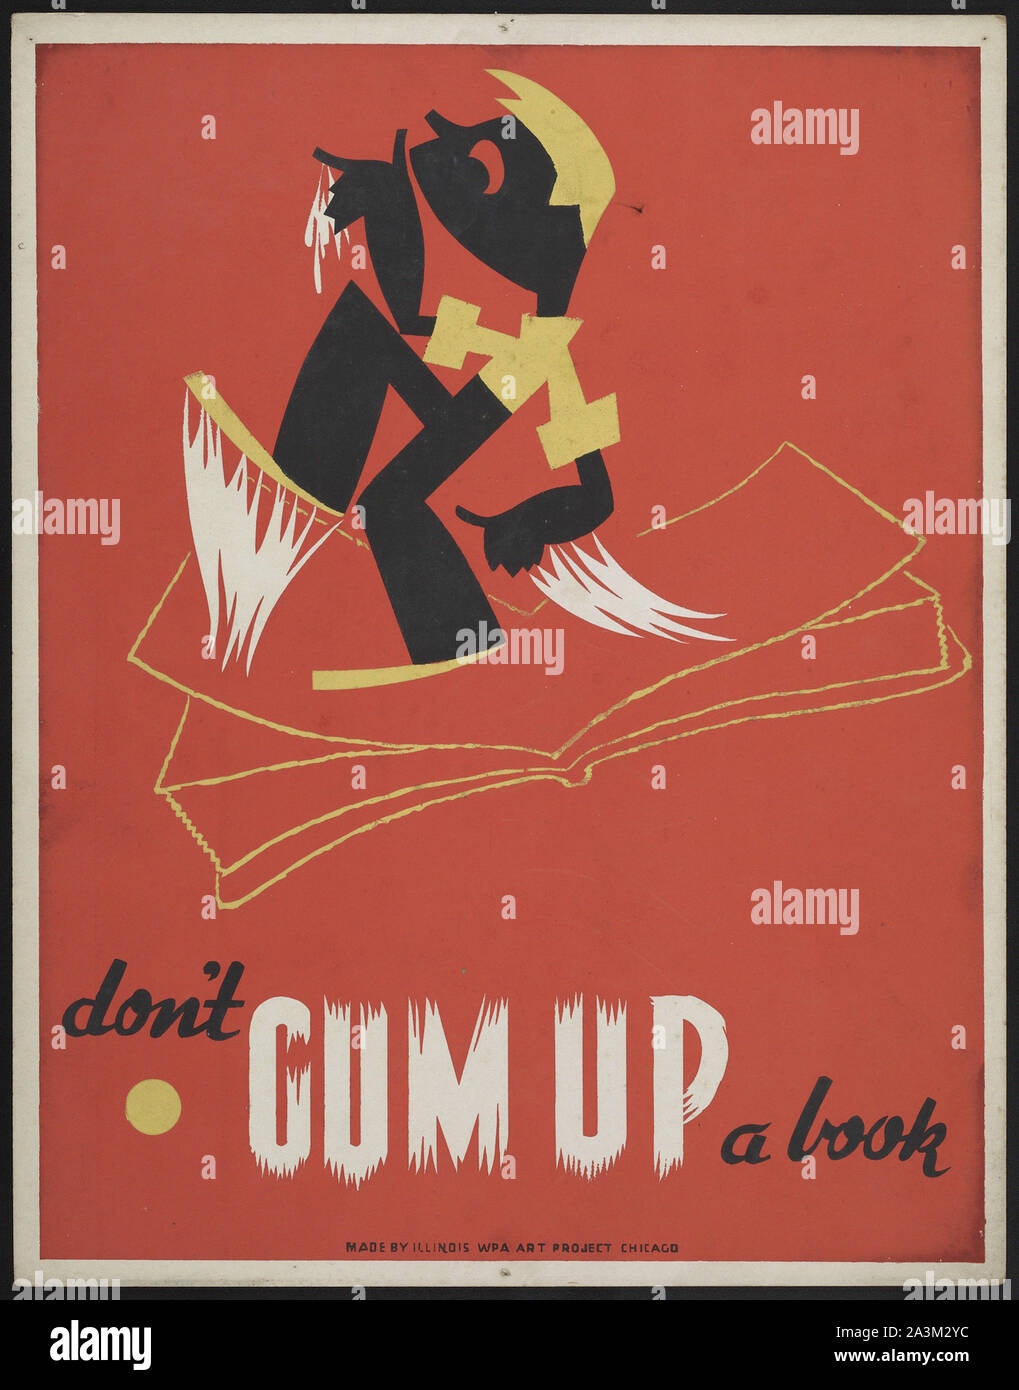 Don't Gum Up a Book -  Work Progress Administration - Federal Art Project -  Vintage poster Stock Photo